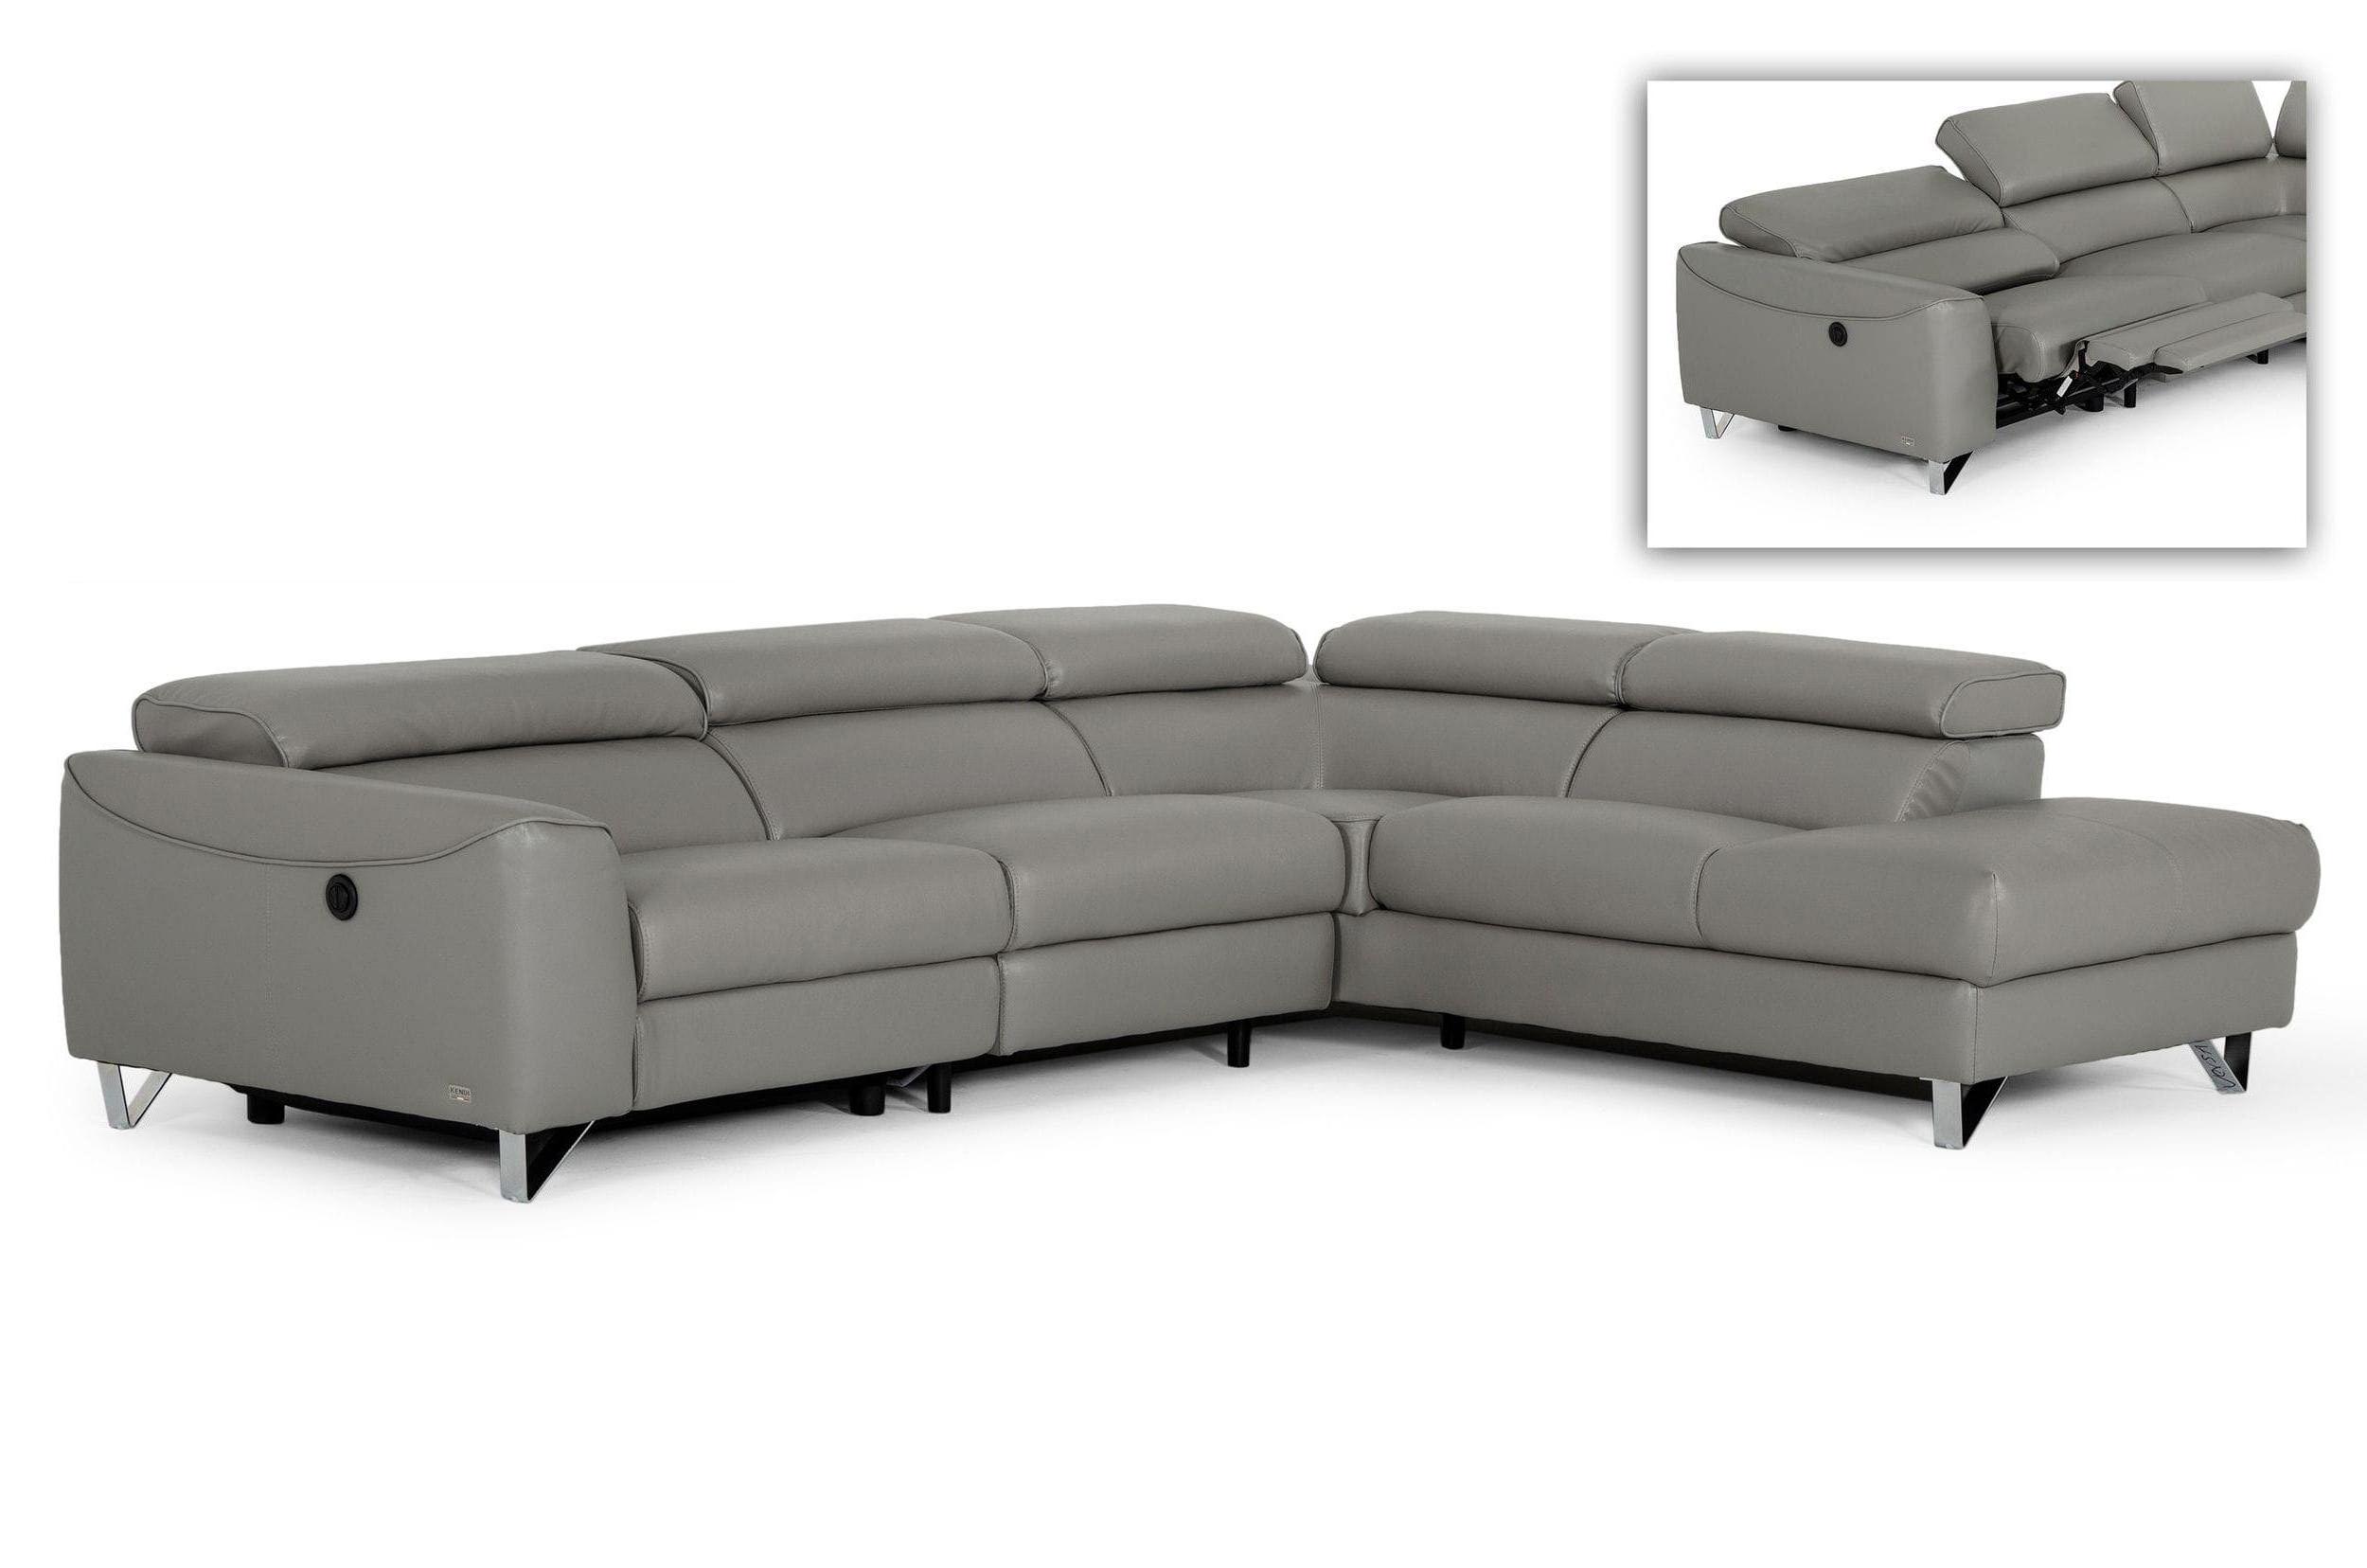 Contemporary, Modern Recliner Sectional VGKNE9112-GREY2-SECT VGKNE9112-GREY2-SECT in Gray Eco-Leather